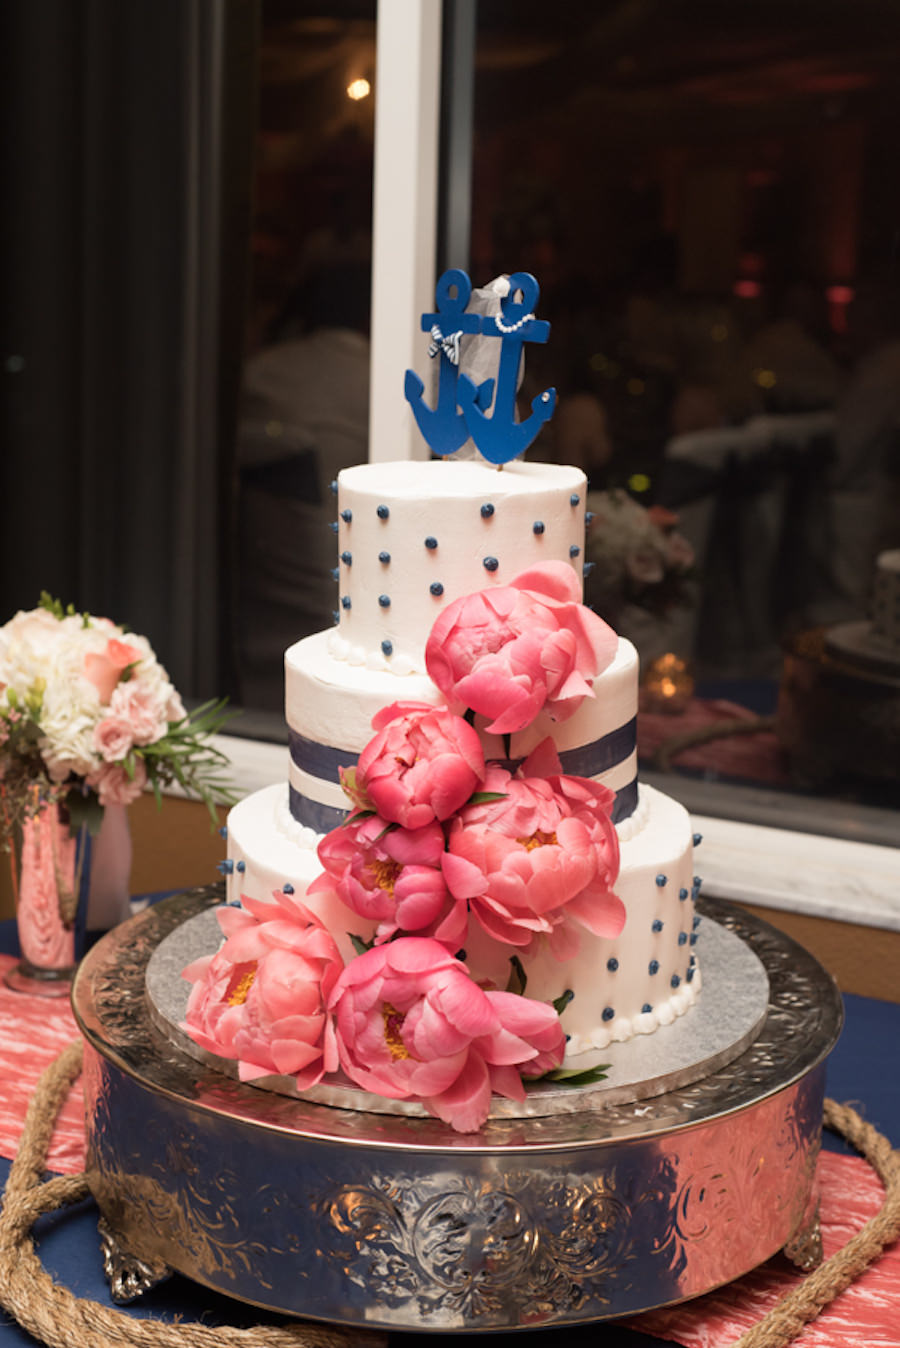 Nautical Themed Three Tier Round Wedding Cake with Navy Polka Dots and Coral Pink Peonies and Anchor Cake Topper | St Petersburg Wedding Florist Iza’s Flowers